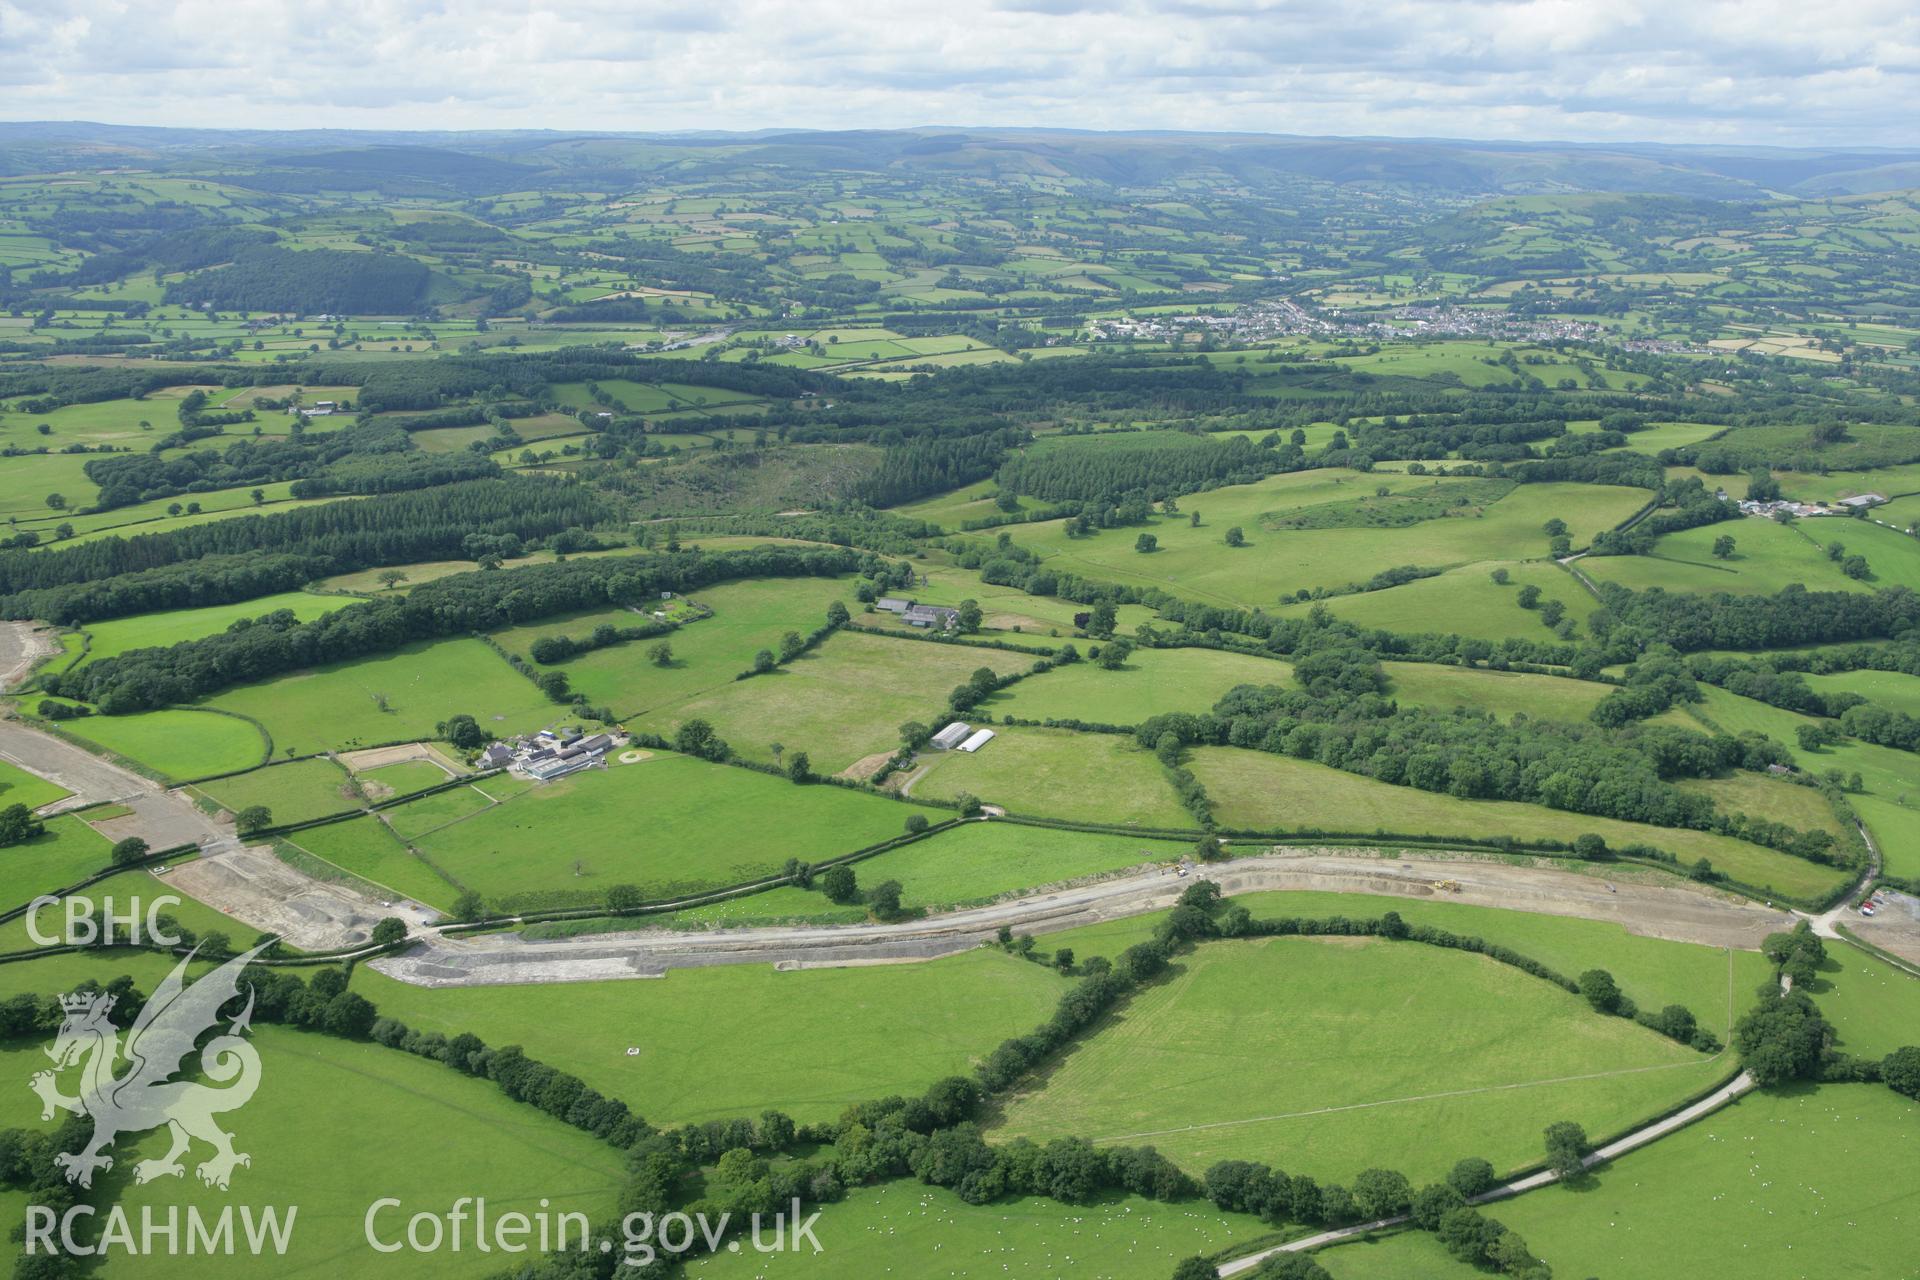 RCAHMW colour oblique aerial photograph of LNG pipeline approaching Mynydd Myddfai. Taken on 09 July 2007 by Toby Driver